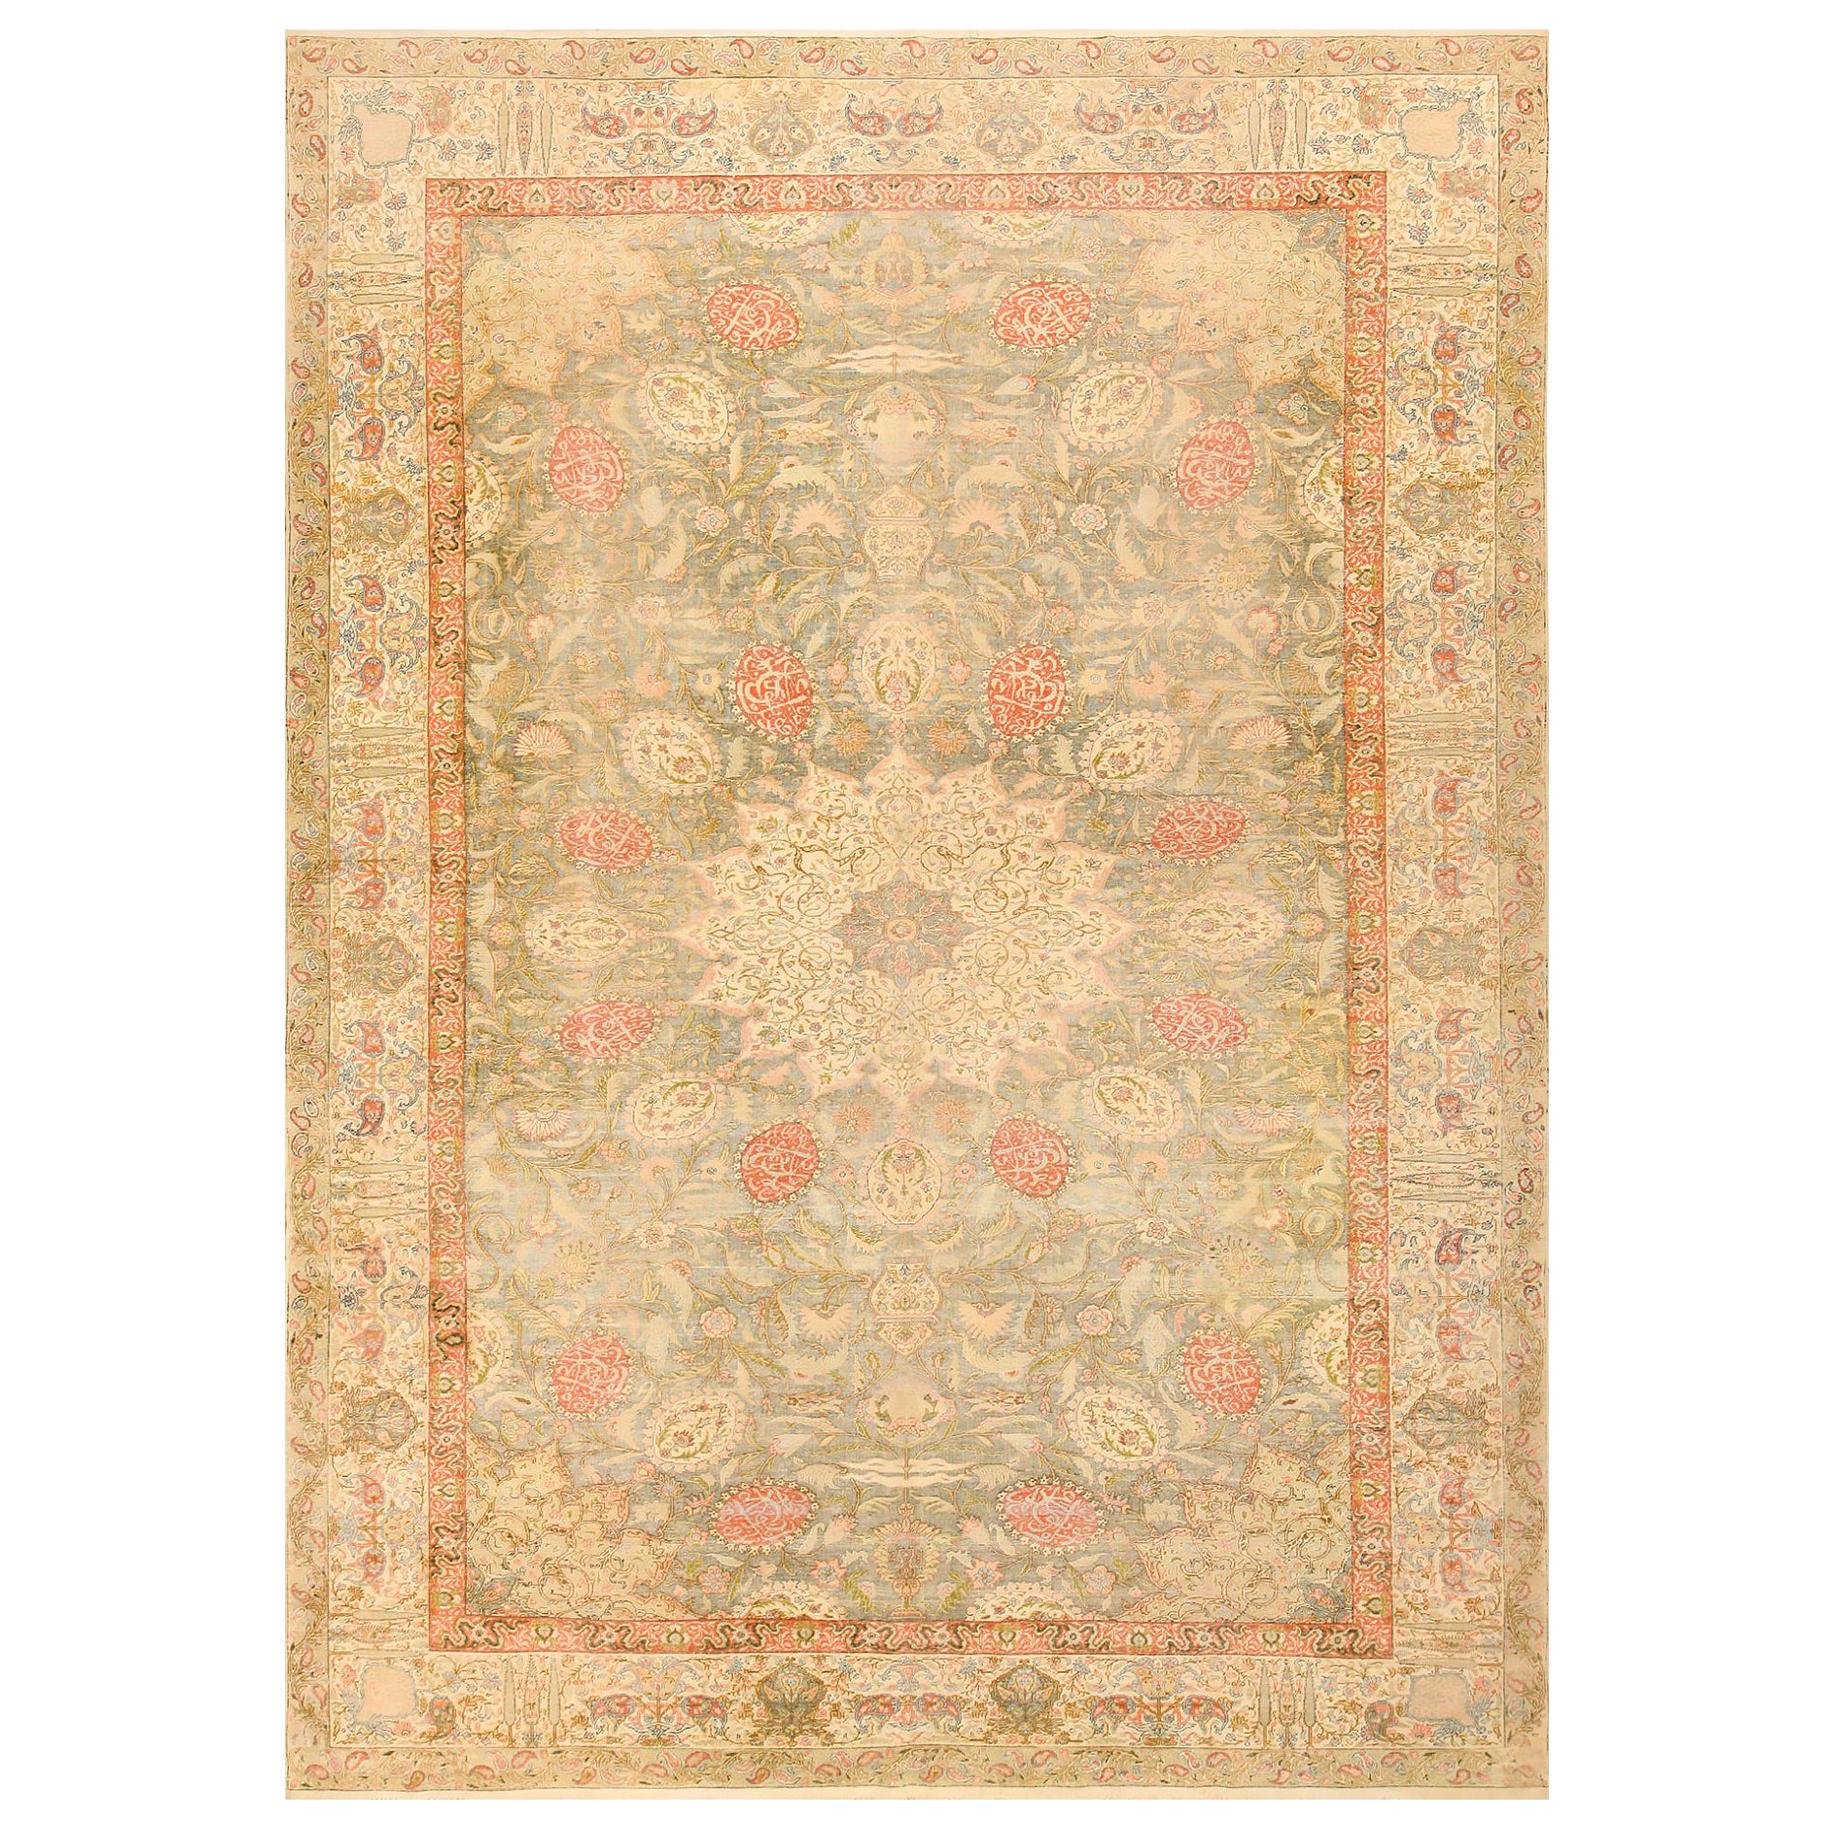 Shabby Chic Antique Silk Turkish Kayseri Rug. Size: 9 ft x 12 ft 6 in